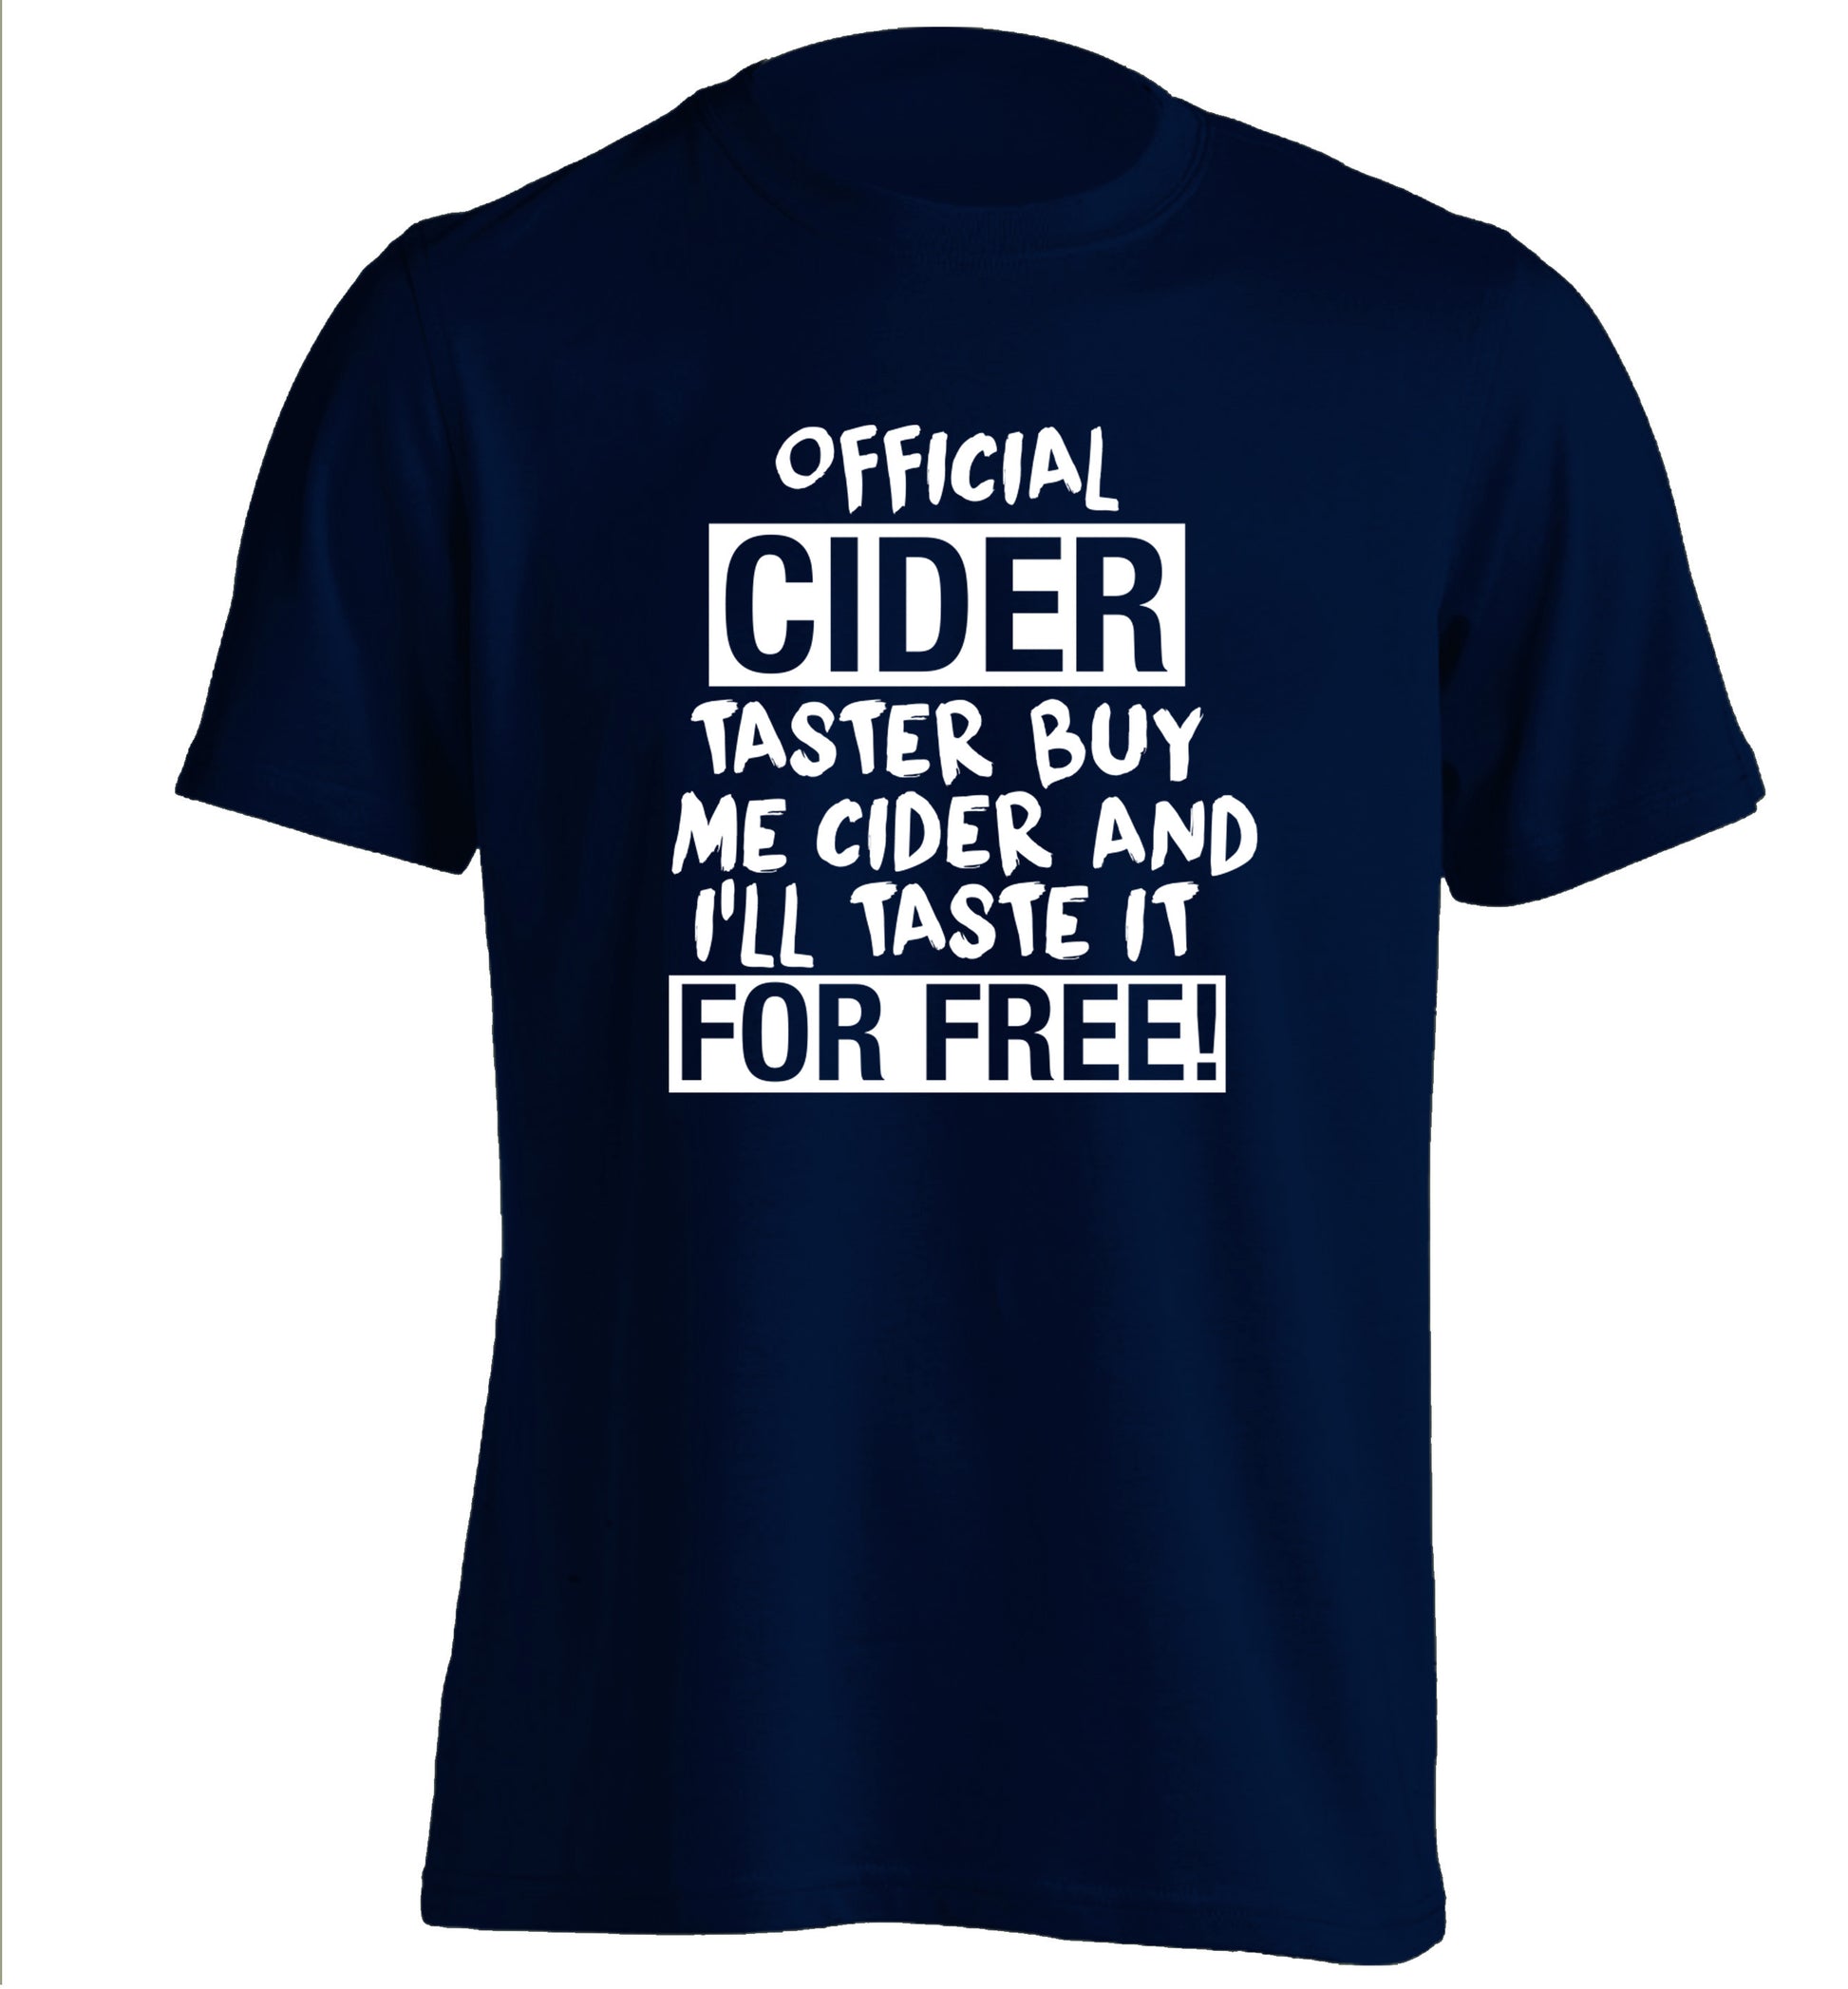 Official cider taster buy me cider and I'll taste it for free! adults unisex navy Tshirt 2XL